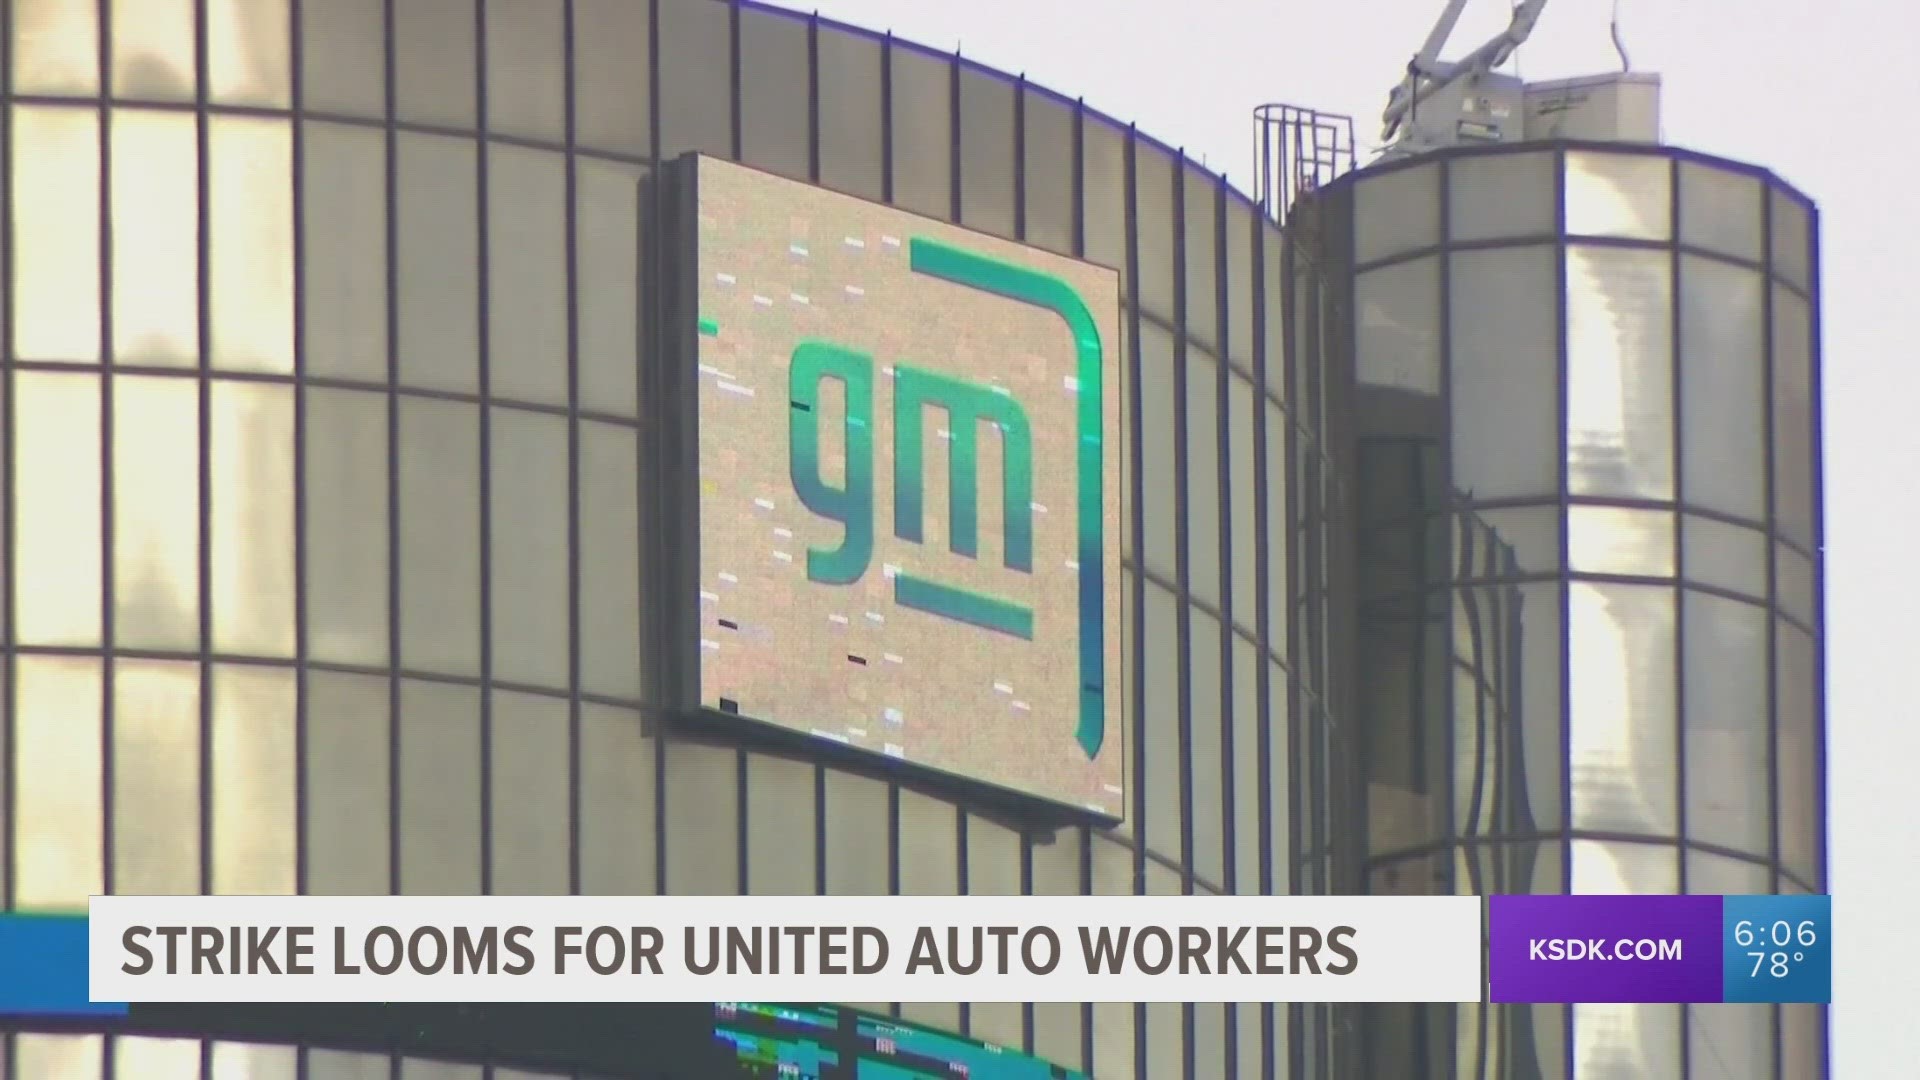 United Auto Workers members voted to authorize a strike if they don't get a new labor contract. That includes the GM plant in Wentzville which has about 4,000 salary